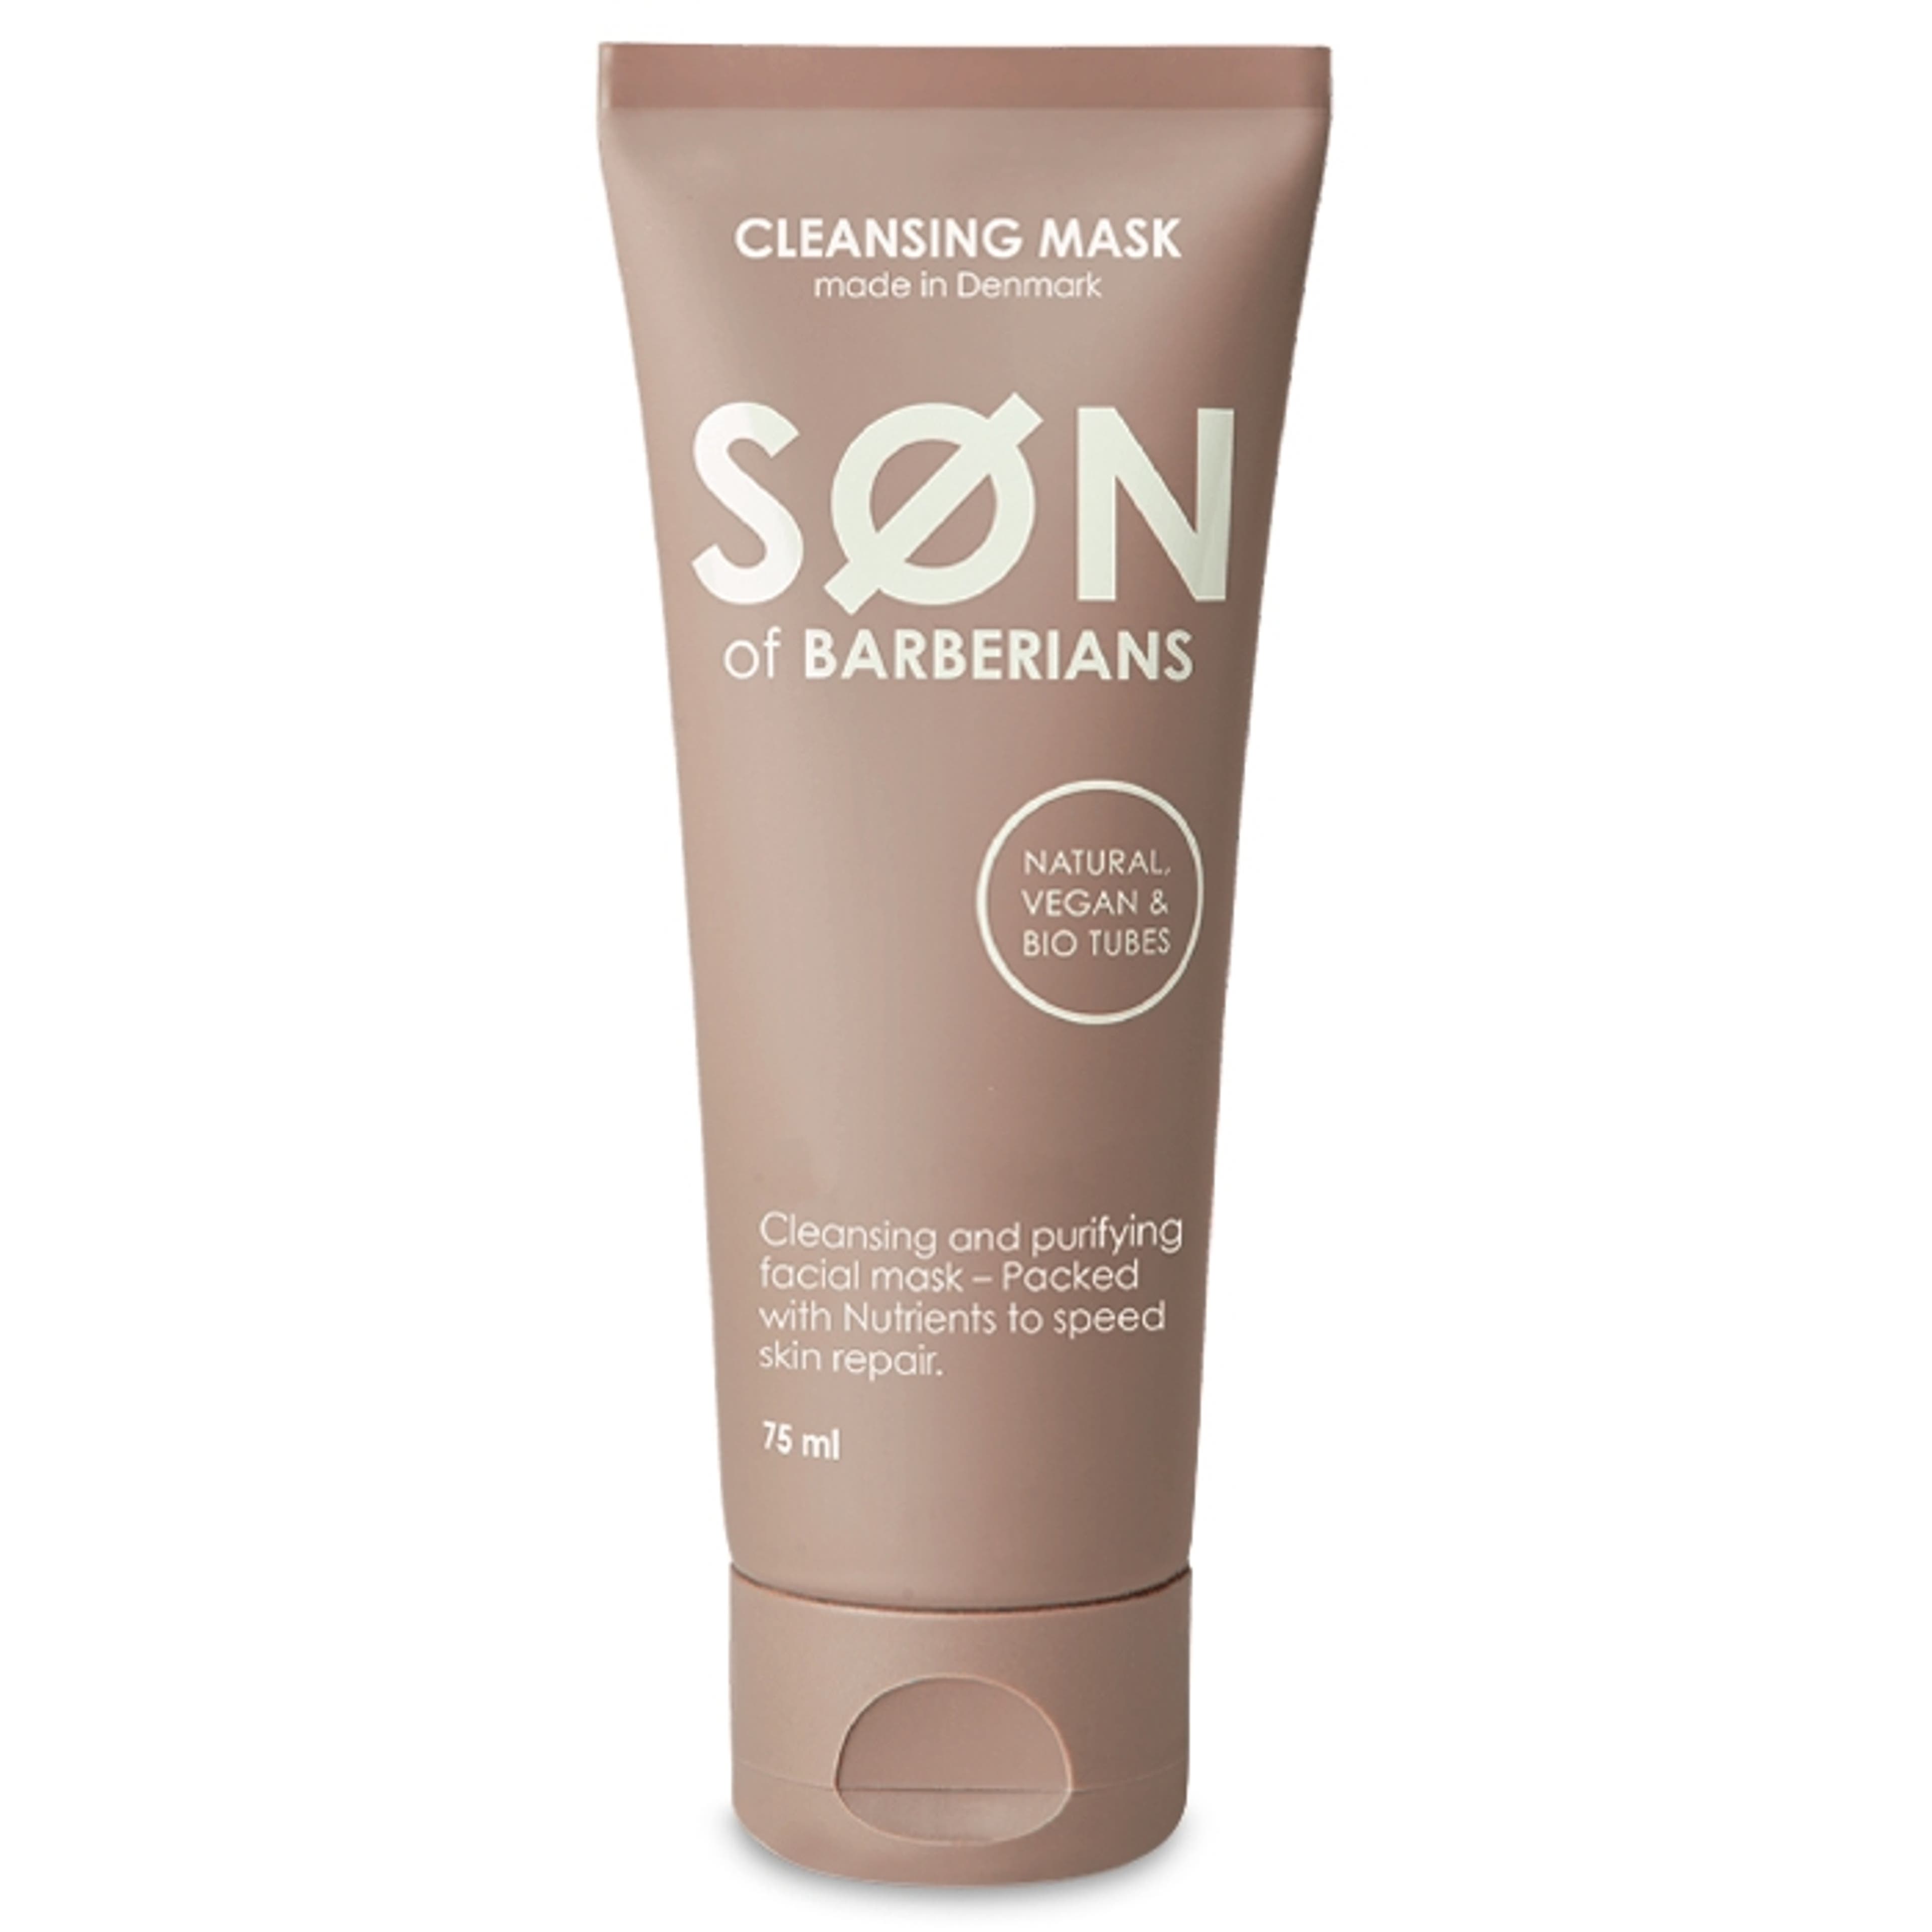 Søn of Barberians - Cleansing Mask